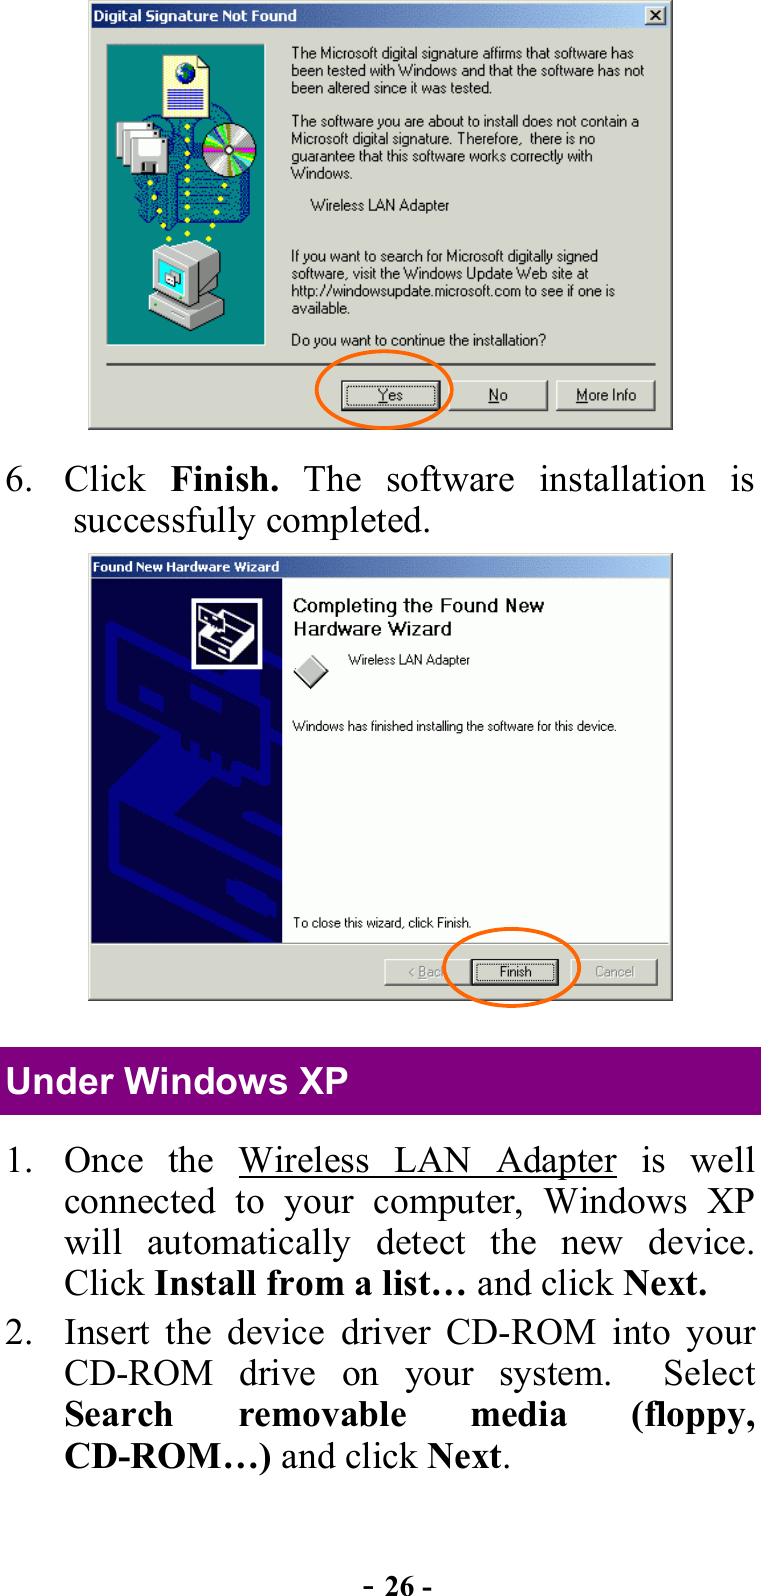  - 26 -  6. Click Finish. The software installation is successfully completed.  Under Windows XP 1.  Once the Wireless LAN Adapter is well connected to your computer, Windows XP will automatically detect the new device. Click Install from a list… and click Next. 2.  Insert the device driver CD-ROM into your CD-ROM drive on your system.  Select Search removable media (floppy, CD-ROM…) and click Next. 